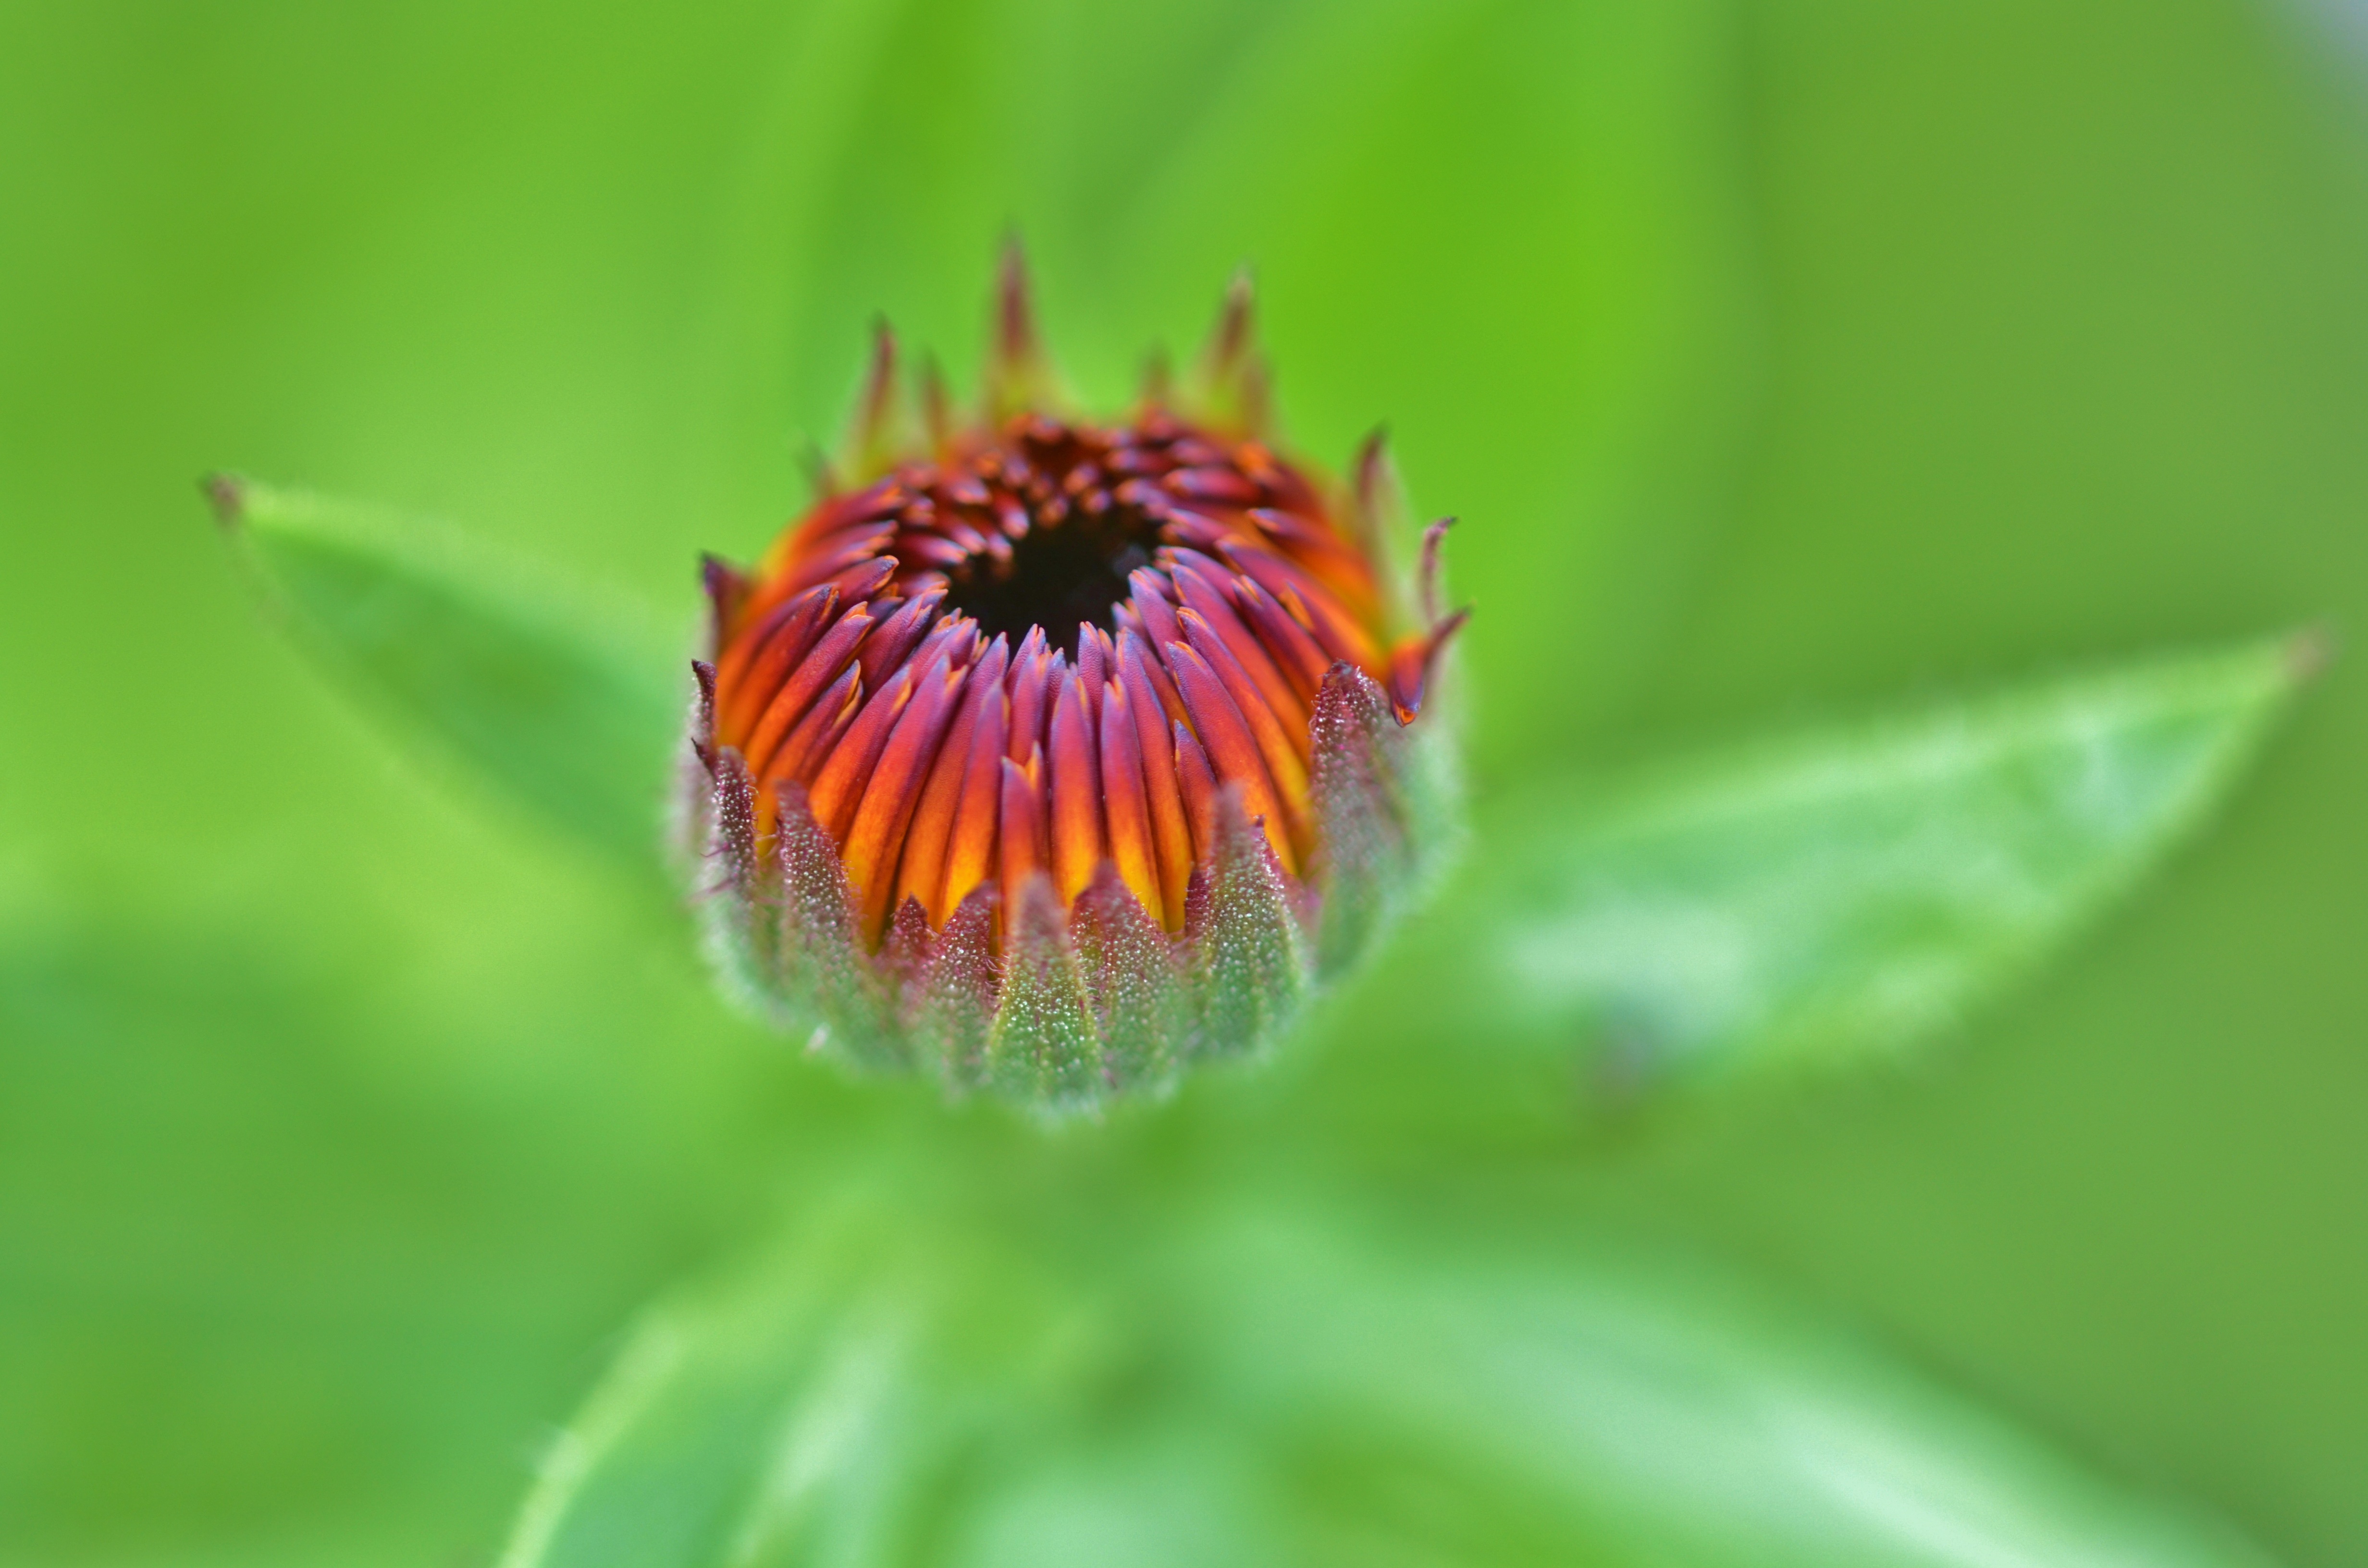 Fire flower on a green background